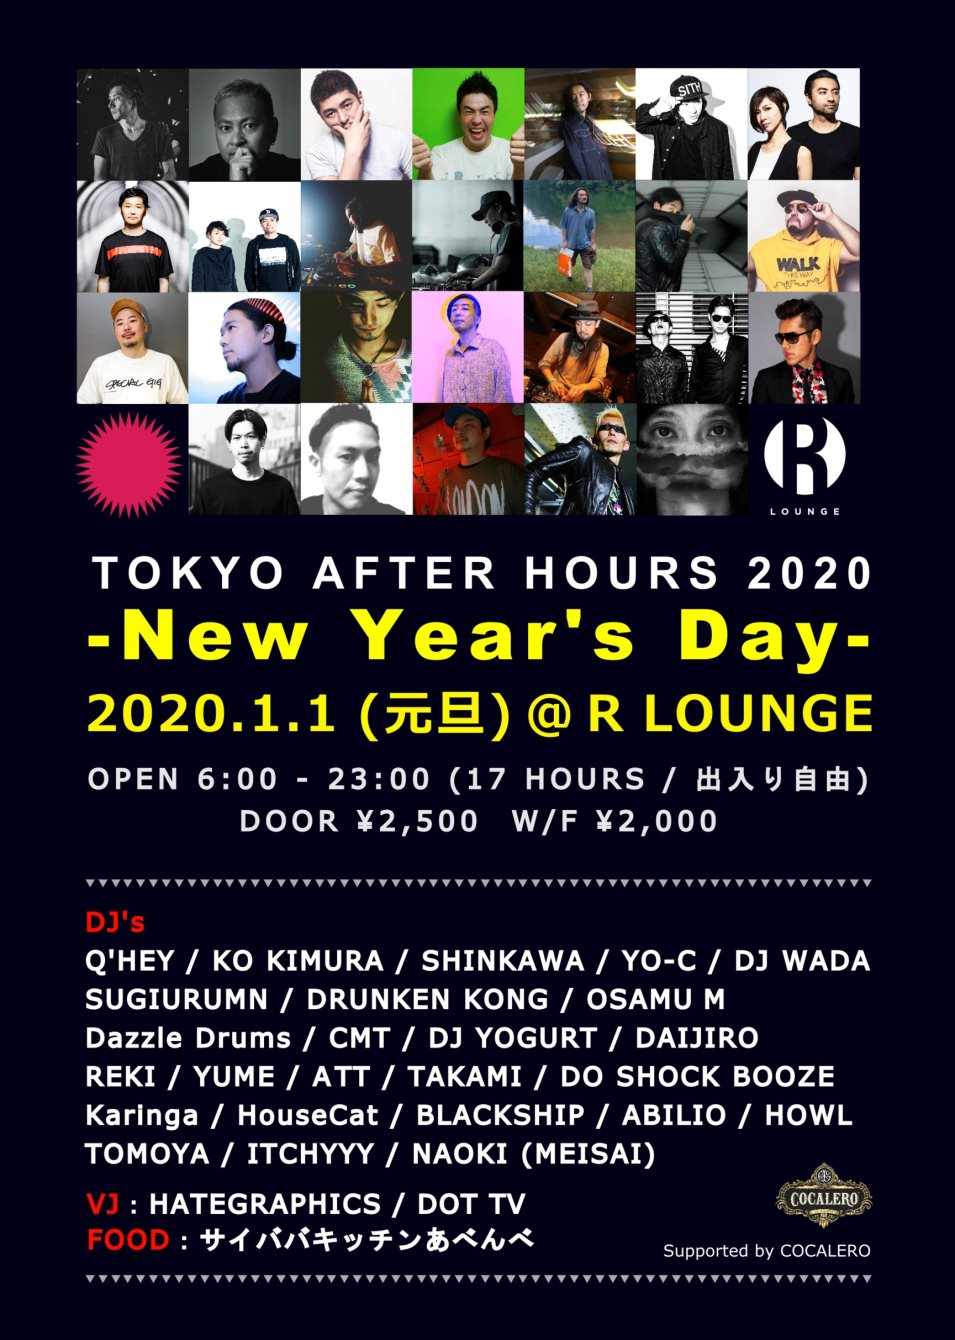 Tokyo After Hours 2020 -New Year's Day- - Flyer back